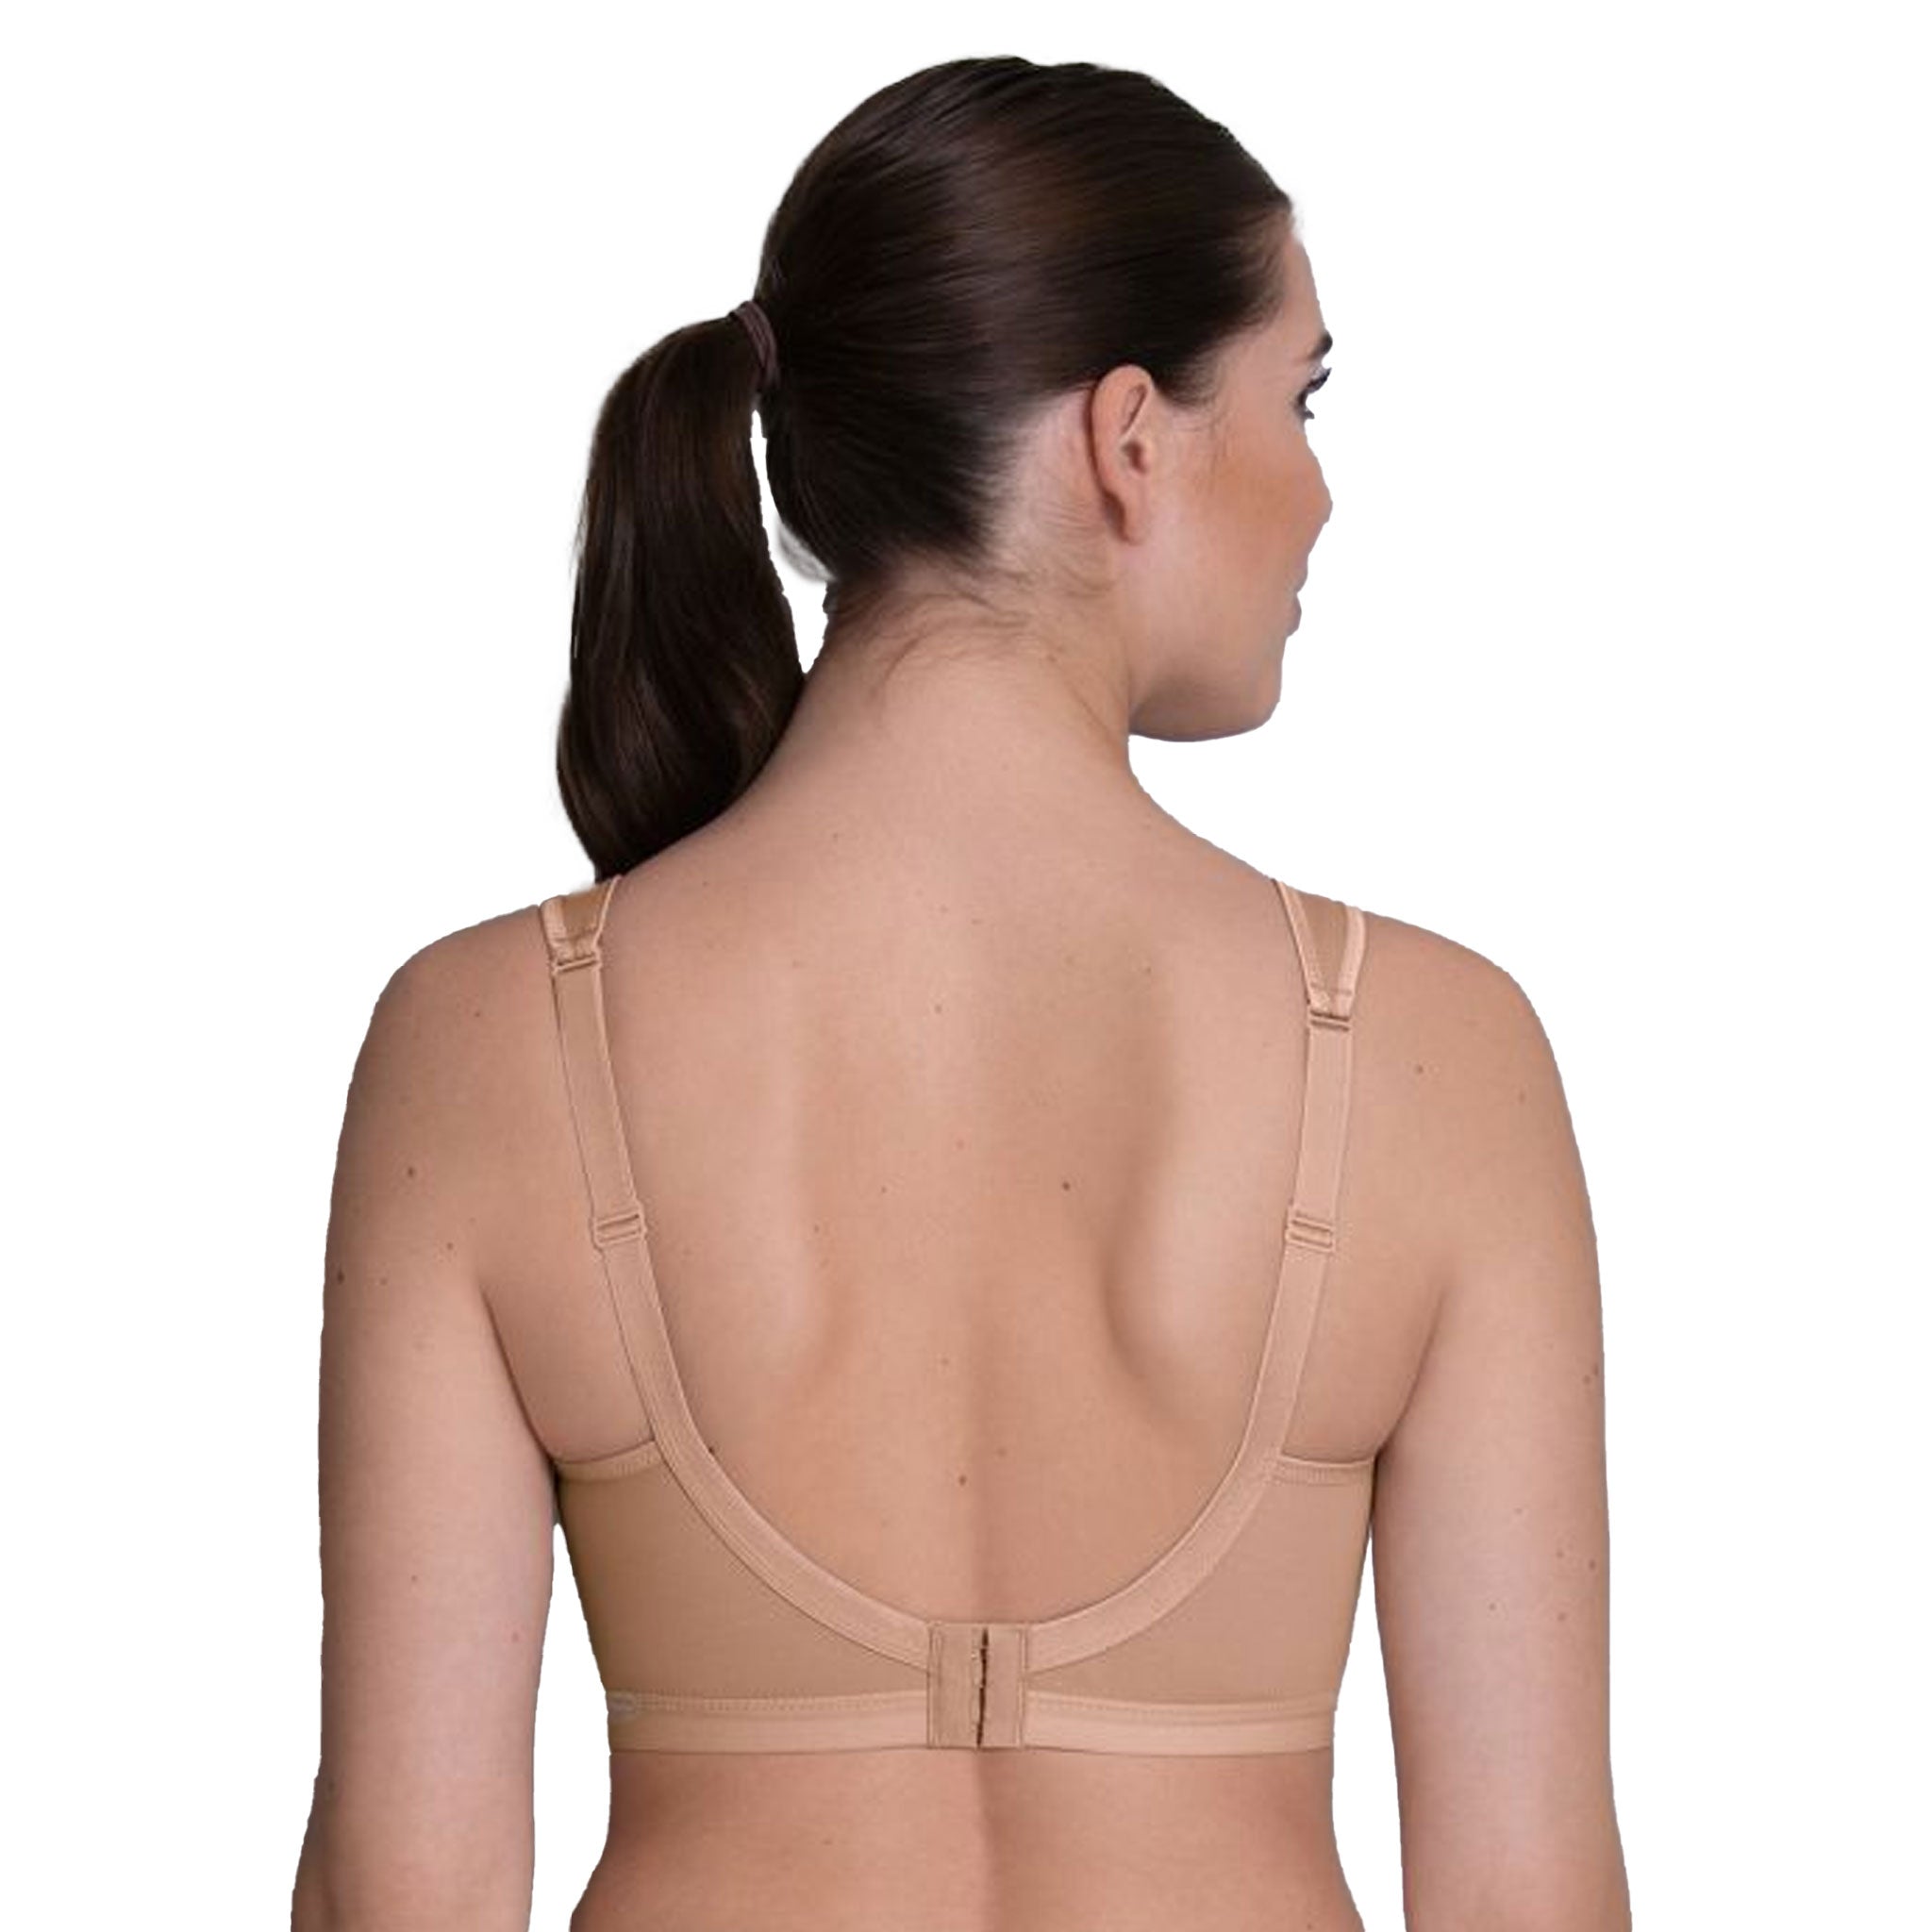 Anita Light and Firm Sports Bra in Sand